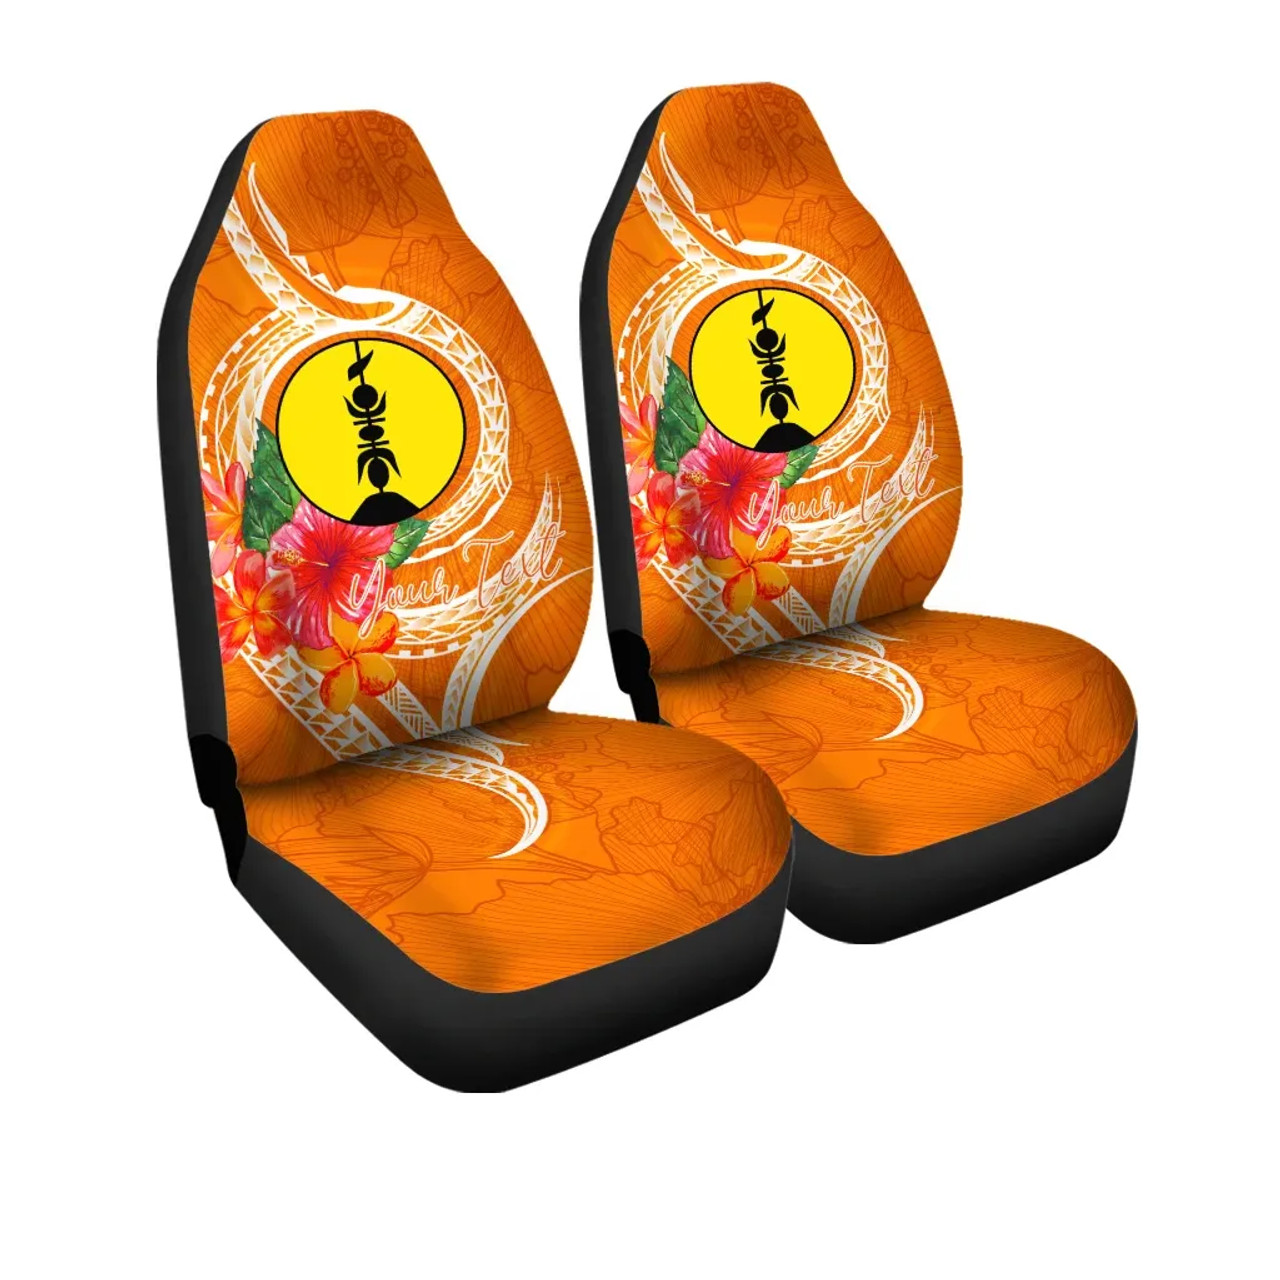 New Caledonia Polynesian Custom Personalised Car Seat Covers - Orange Floral With Seal